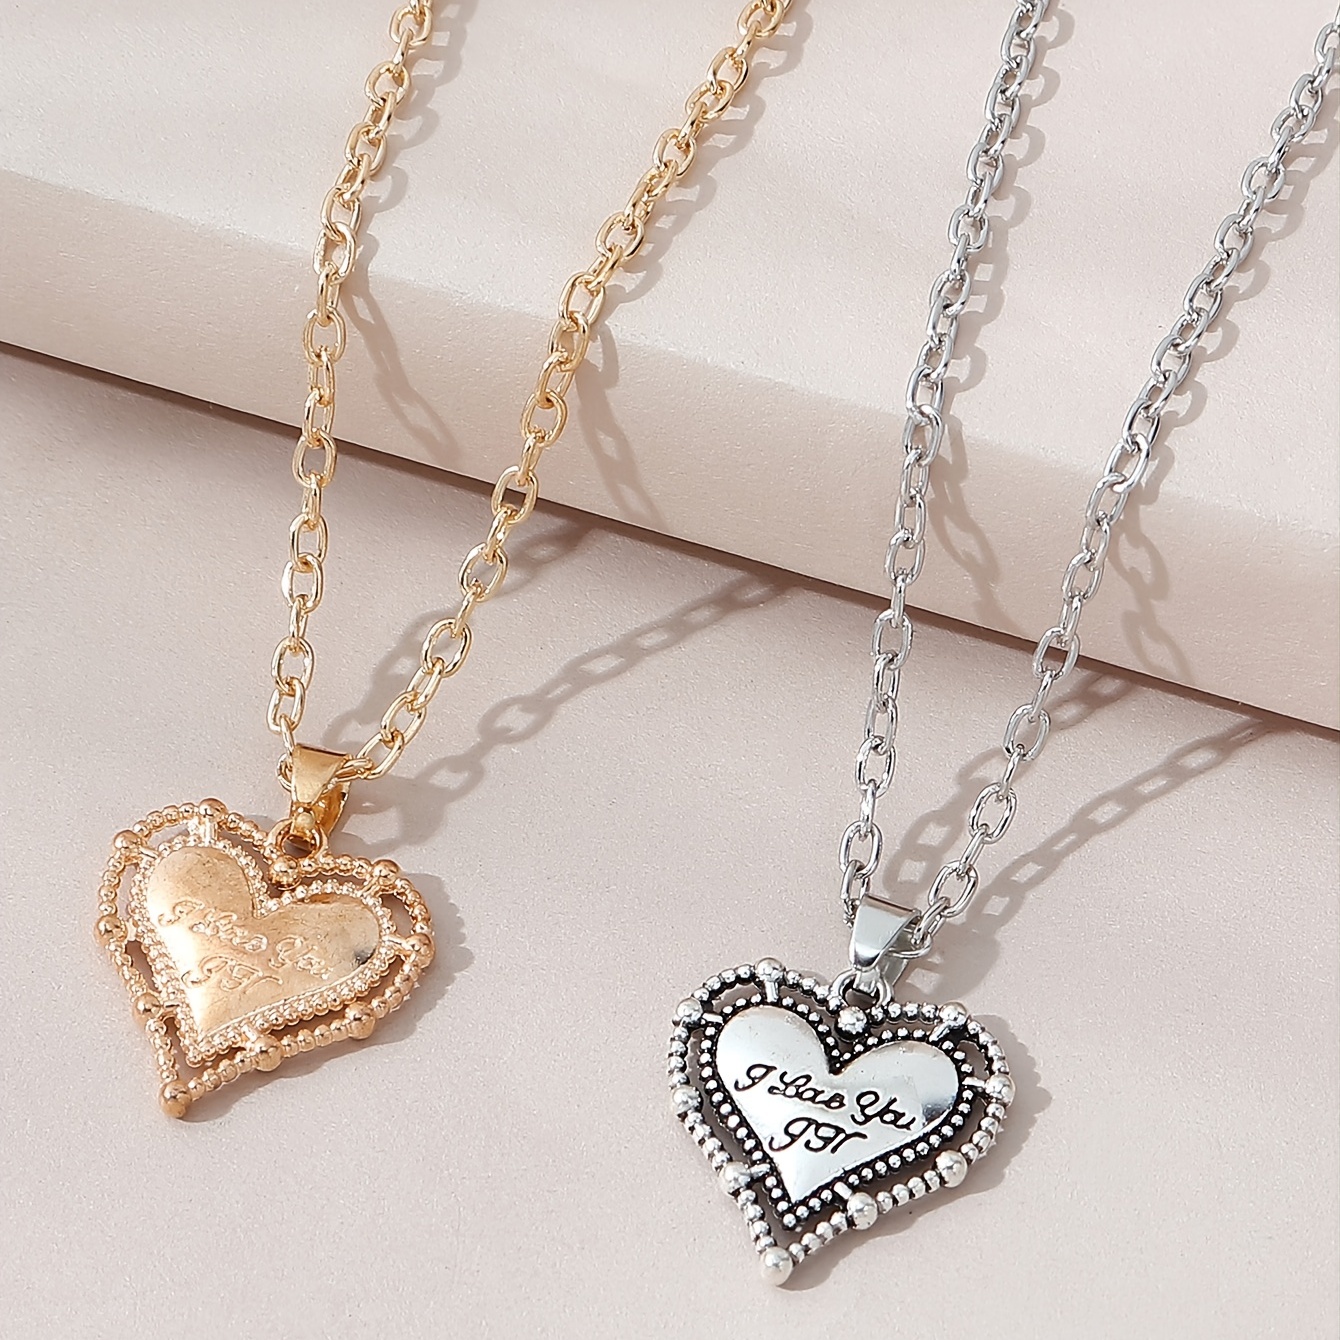 2 Pcs Heart Shape Couples Matching Necklace With I Love You Letter Shape  Pattern On Heart Shape Pendant Romantic Jewelry For Couples Gift, Don't  Miss These Great Deals